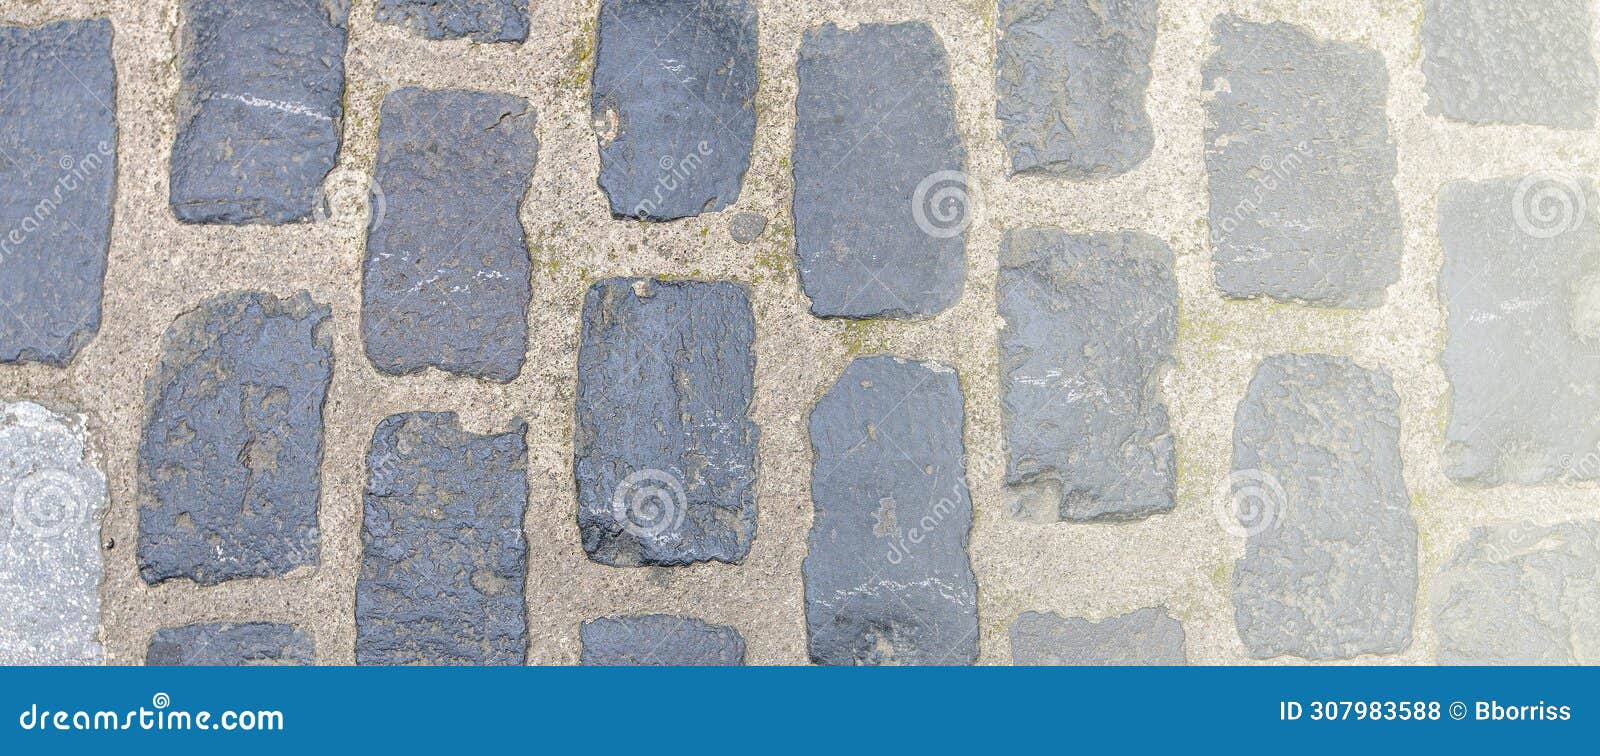 paving blocks made of asymmetrical stone with copy space